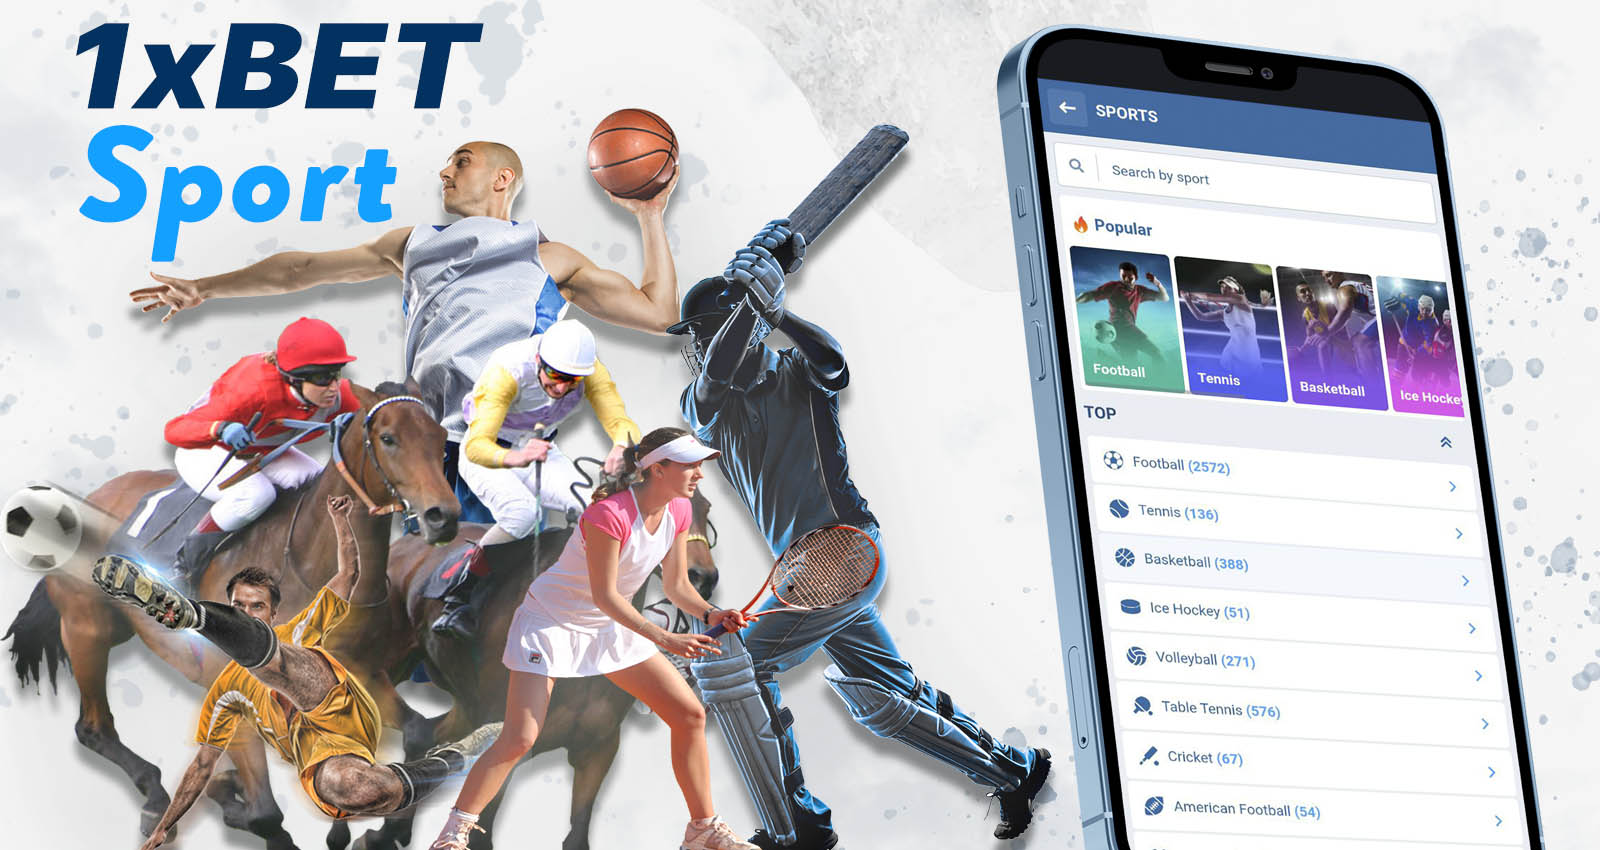 1xBet has a wide range of sports betting